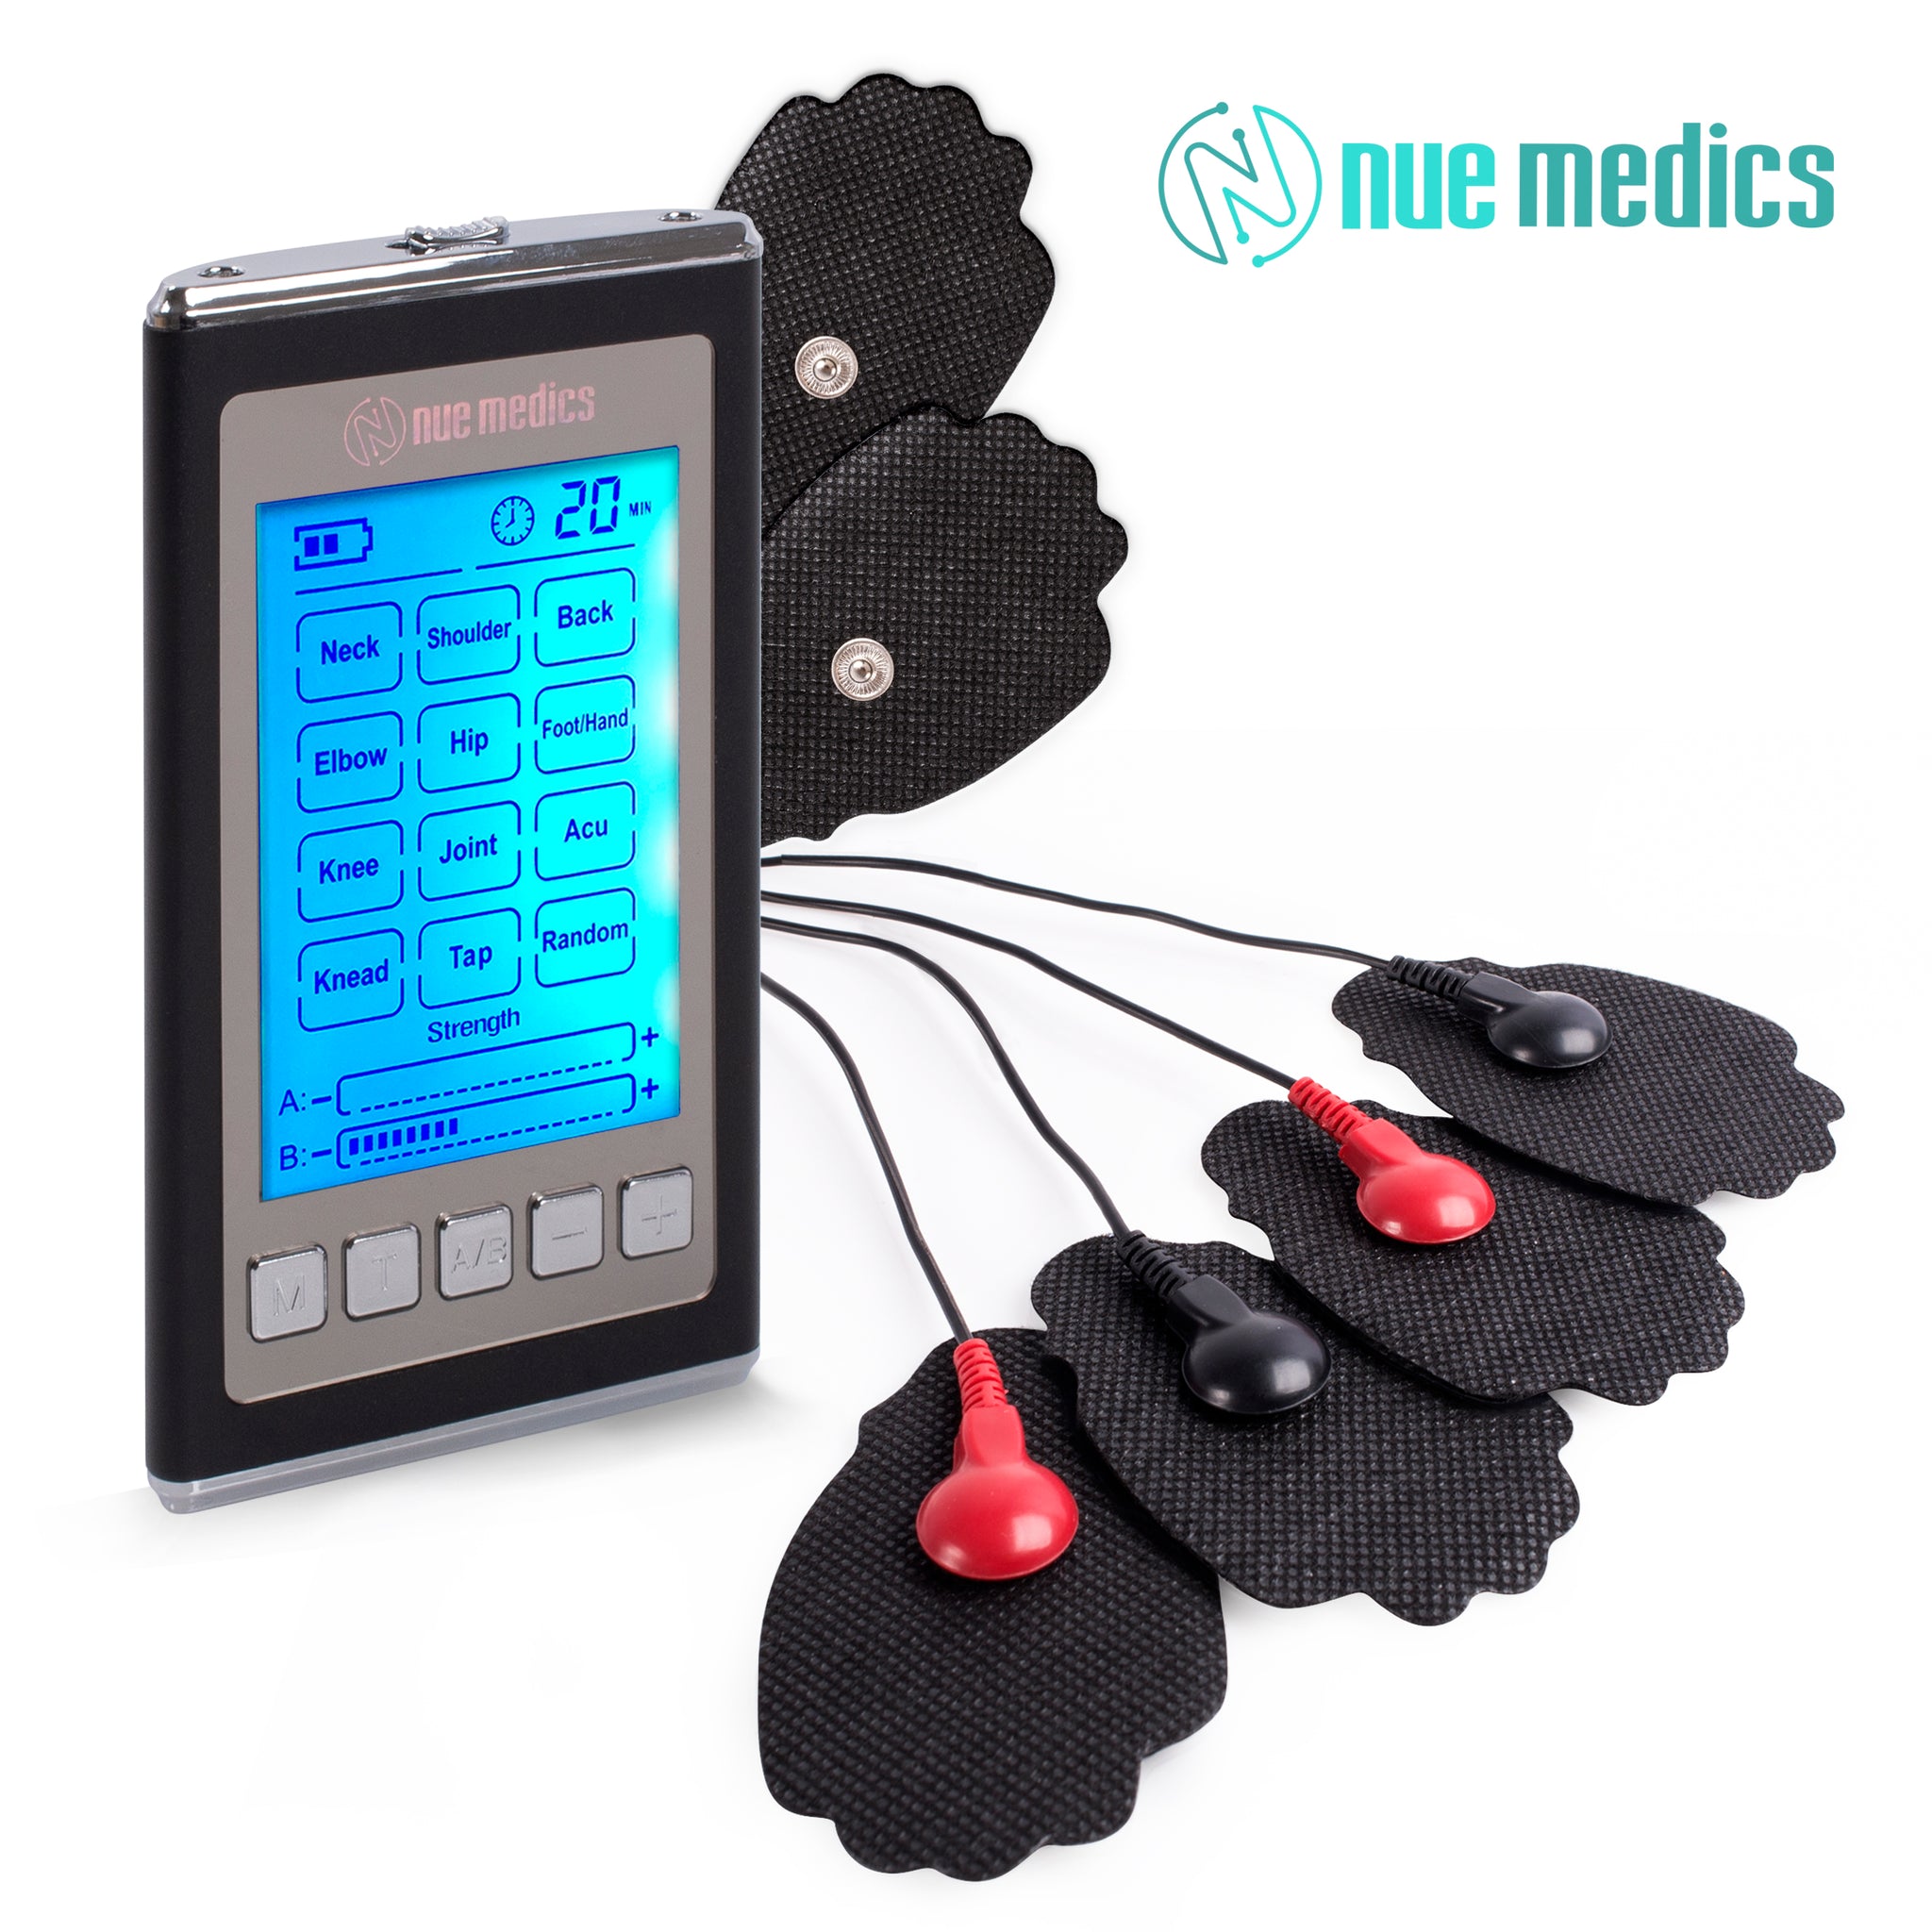 TENS Unit Muscle Stimulator with Auto Shut Off by TRAKK at the